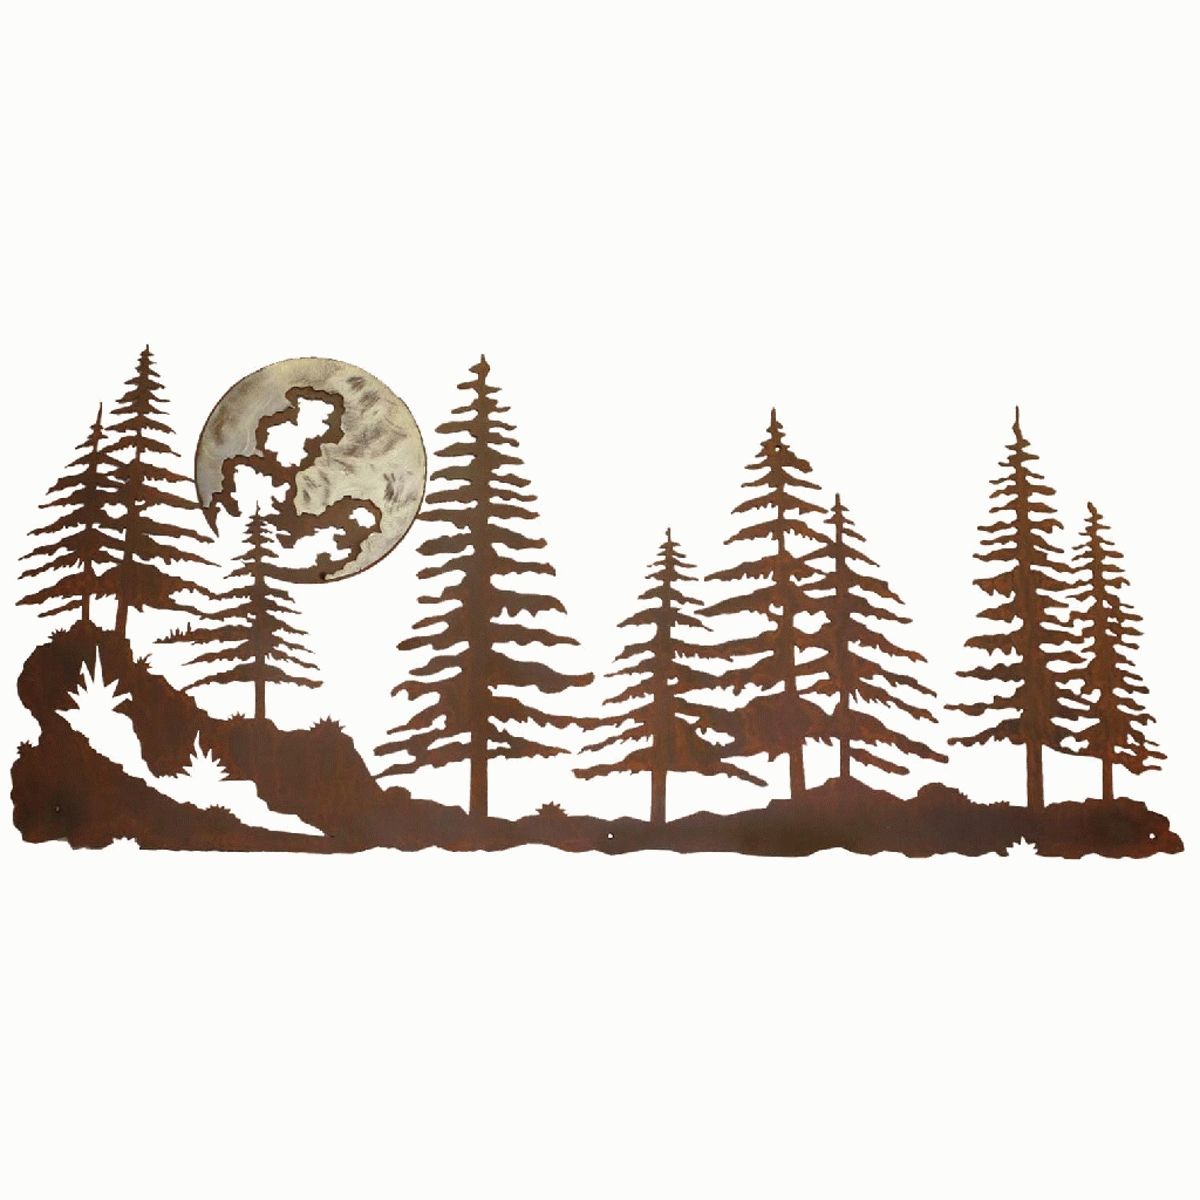 Pine Forest Burnished Metal Wall Art Throughout Metal Pine Tree Wall Art (View 8 of 20)